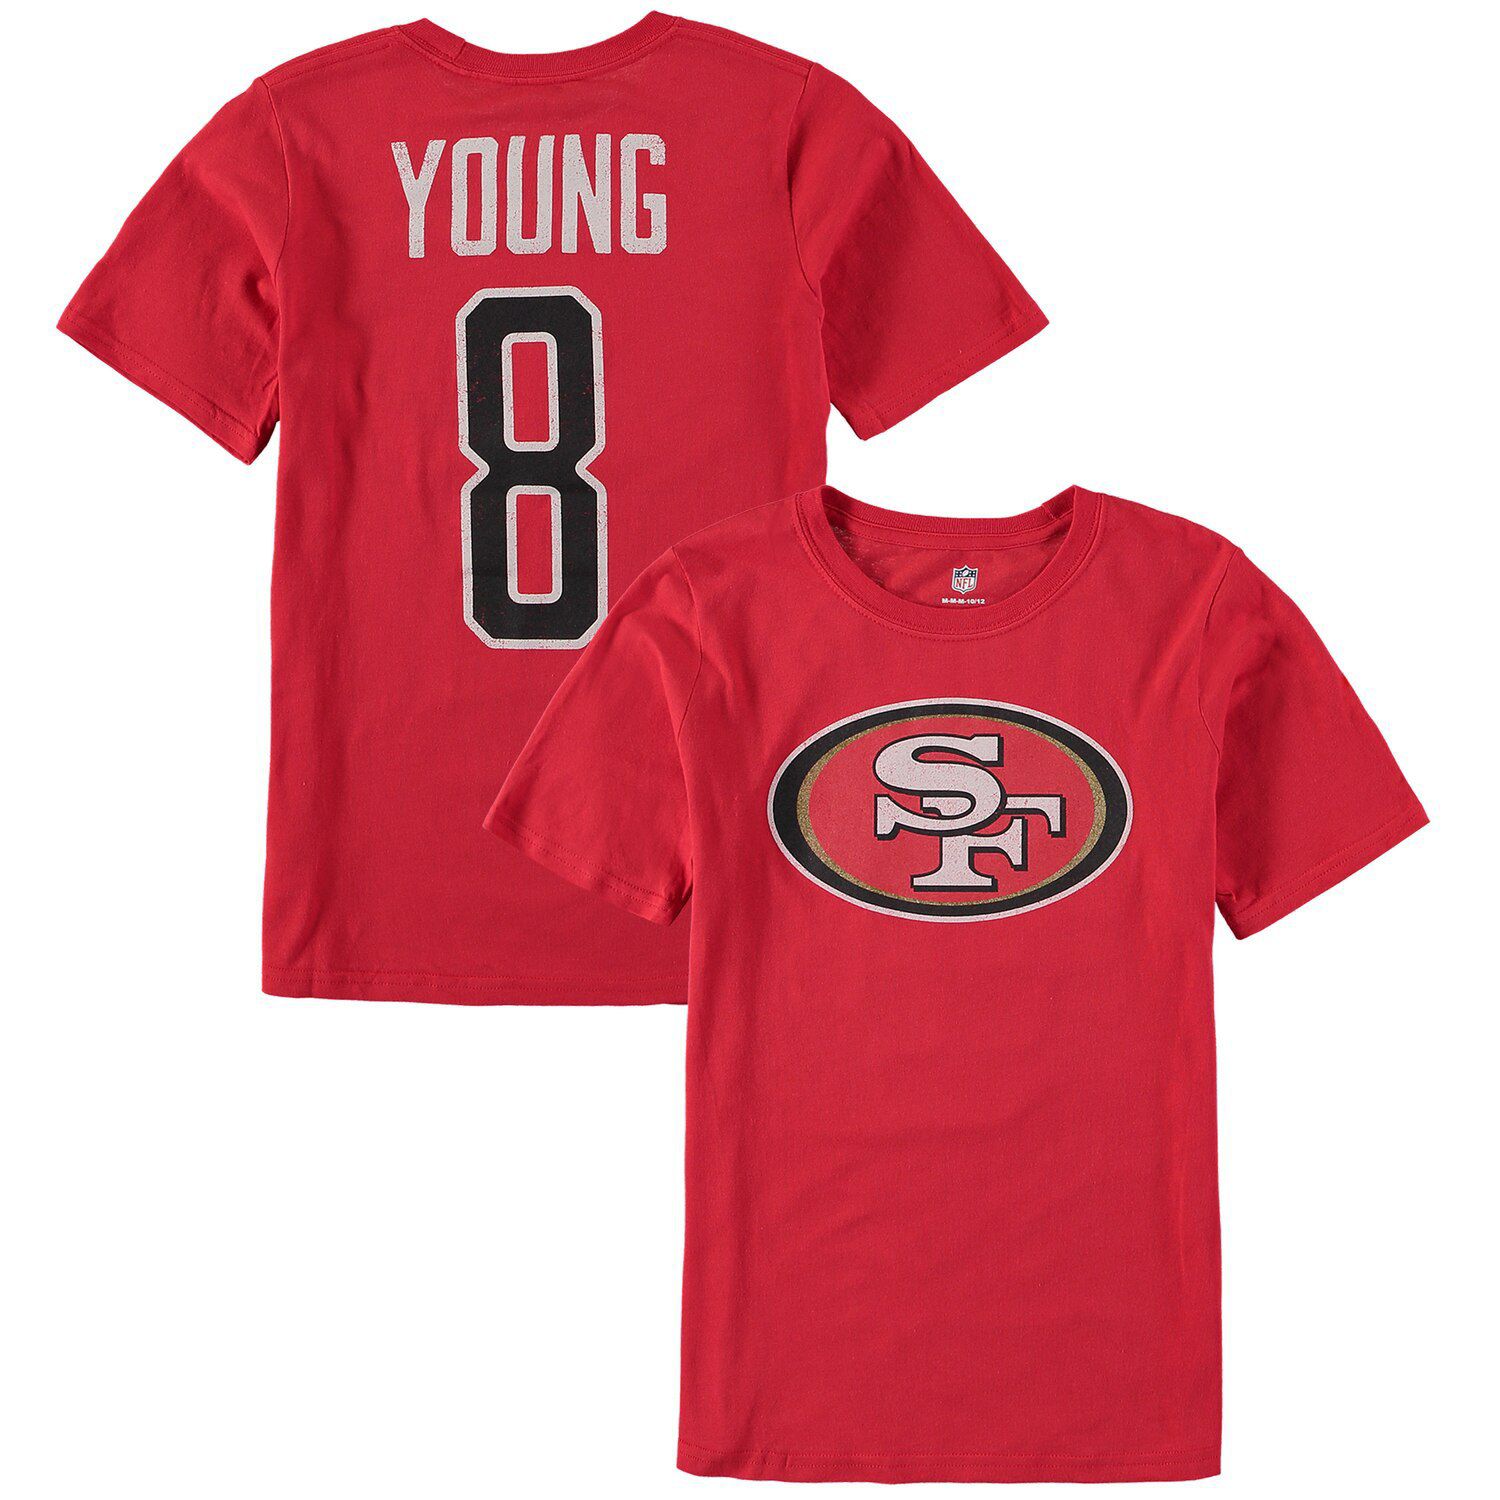 steve young jersey number